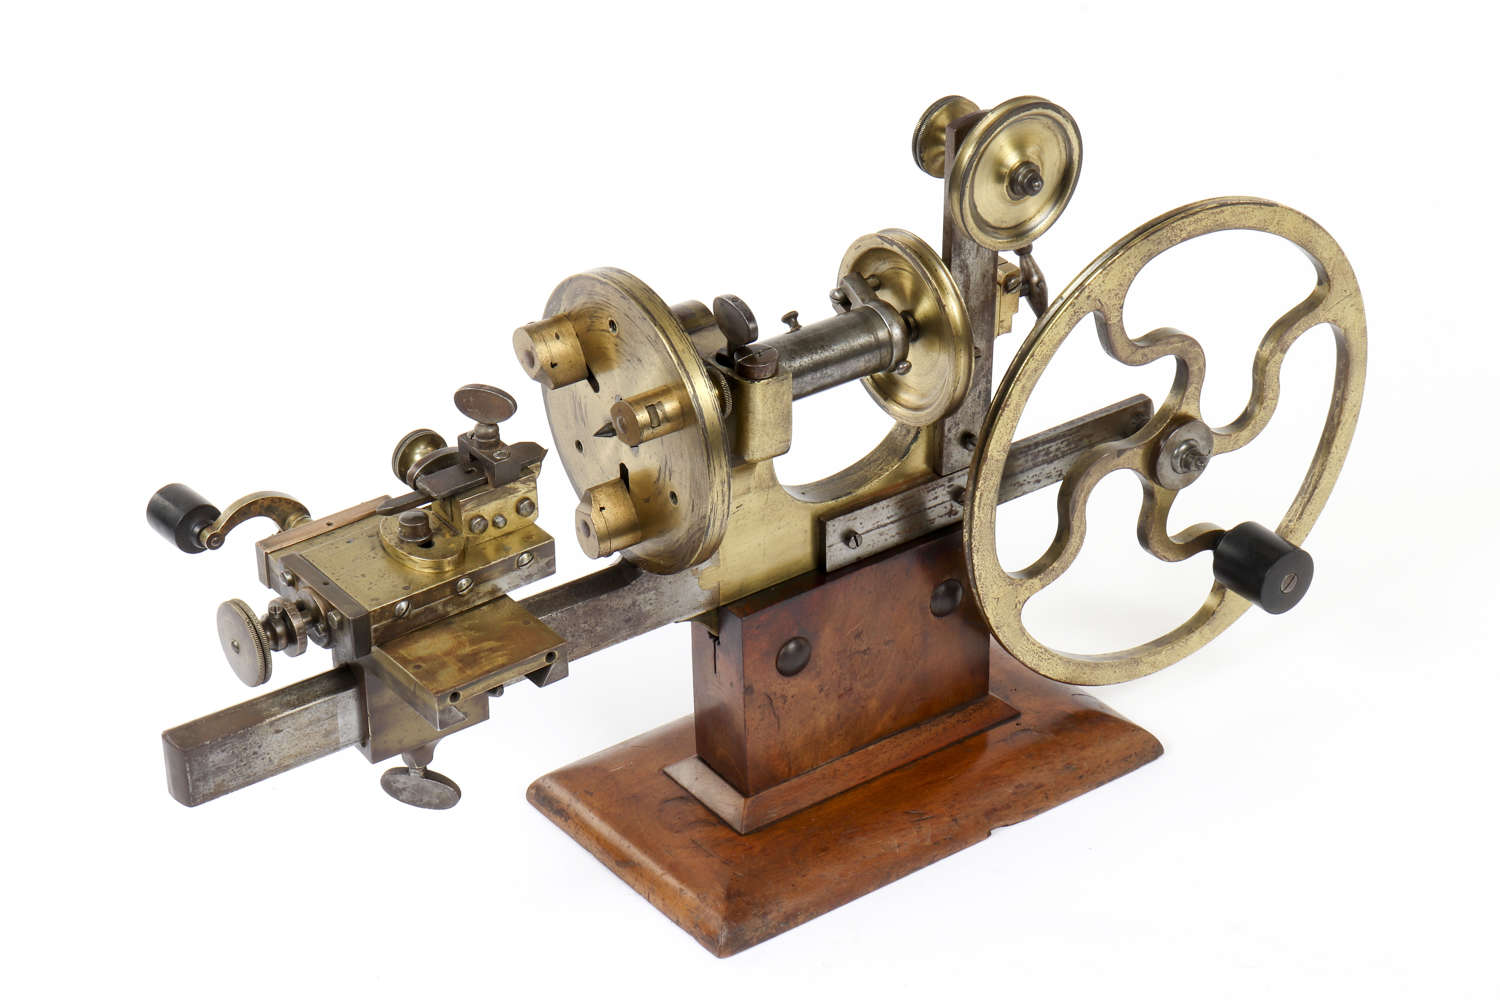 Early 20th century brass watchmaker's lathe